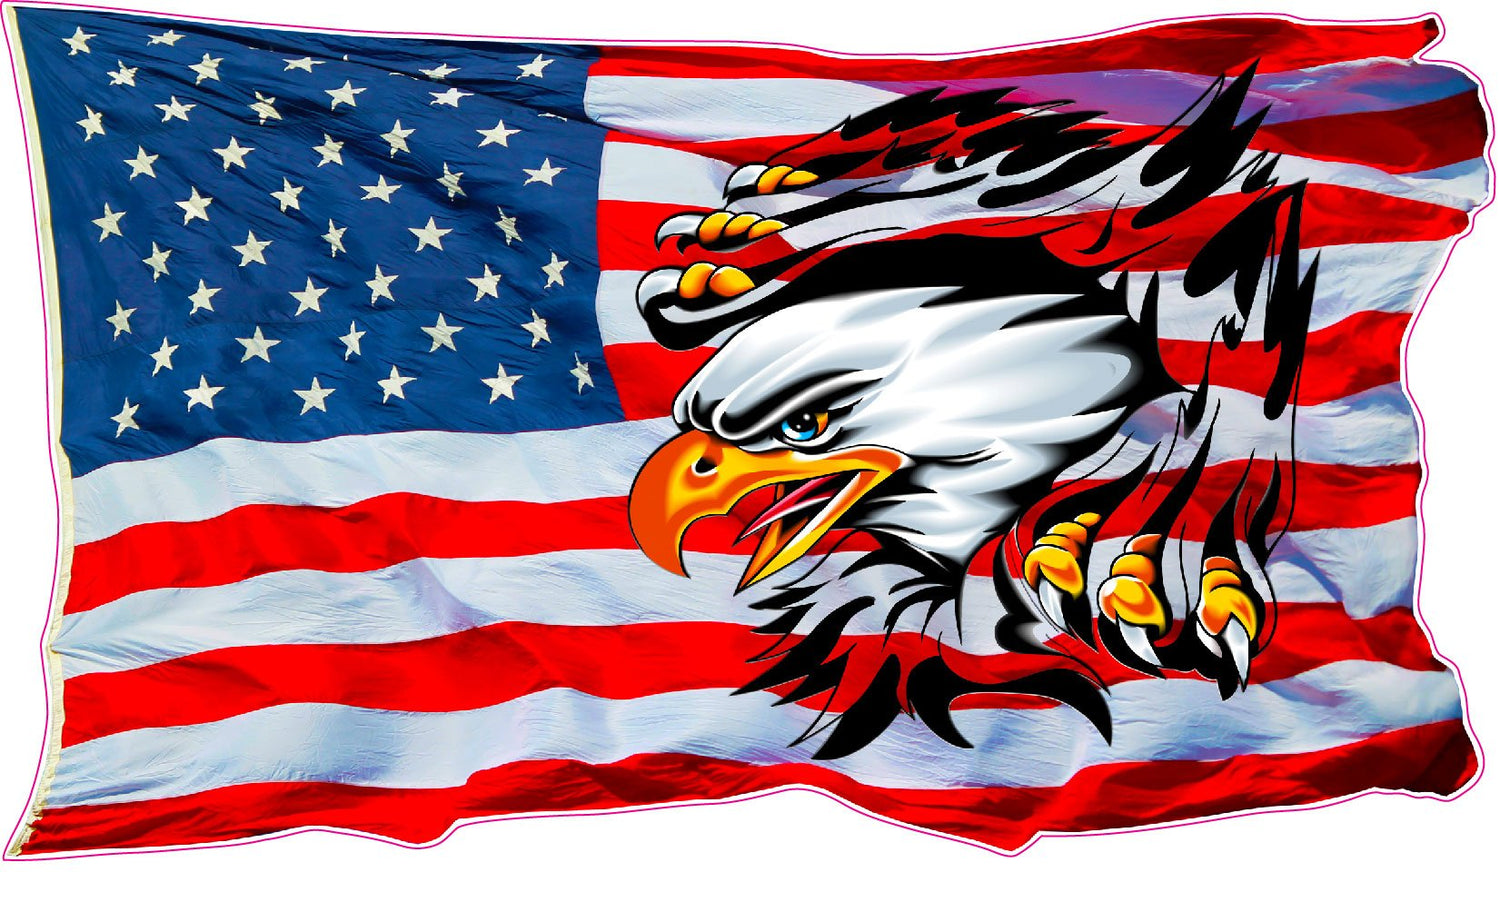 Ripped American Flag Eagle Decal - American Bald Eagle, American bald eagle decal, American eagle, American Eagle American Flag Decal, American flag, American flag decals, American flag eagle decals, American flag stickers, automotive decals, automotive stickers, bumper decals, bumper stickers, decals, eagle decals, eagle stickers, i stand for the flag, Military decals, military stickers, one nation under god, Patriotic stickers, United WE Stand Decal, United We Stand One Nation Under God Decal,